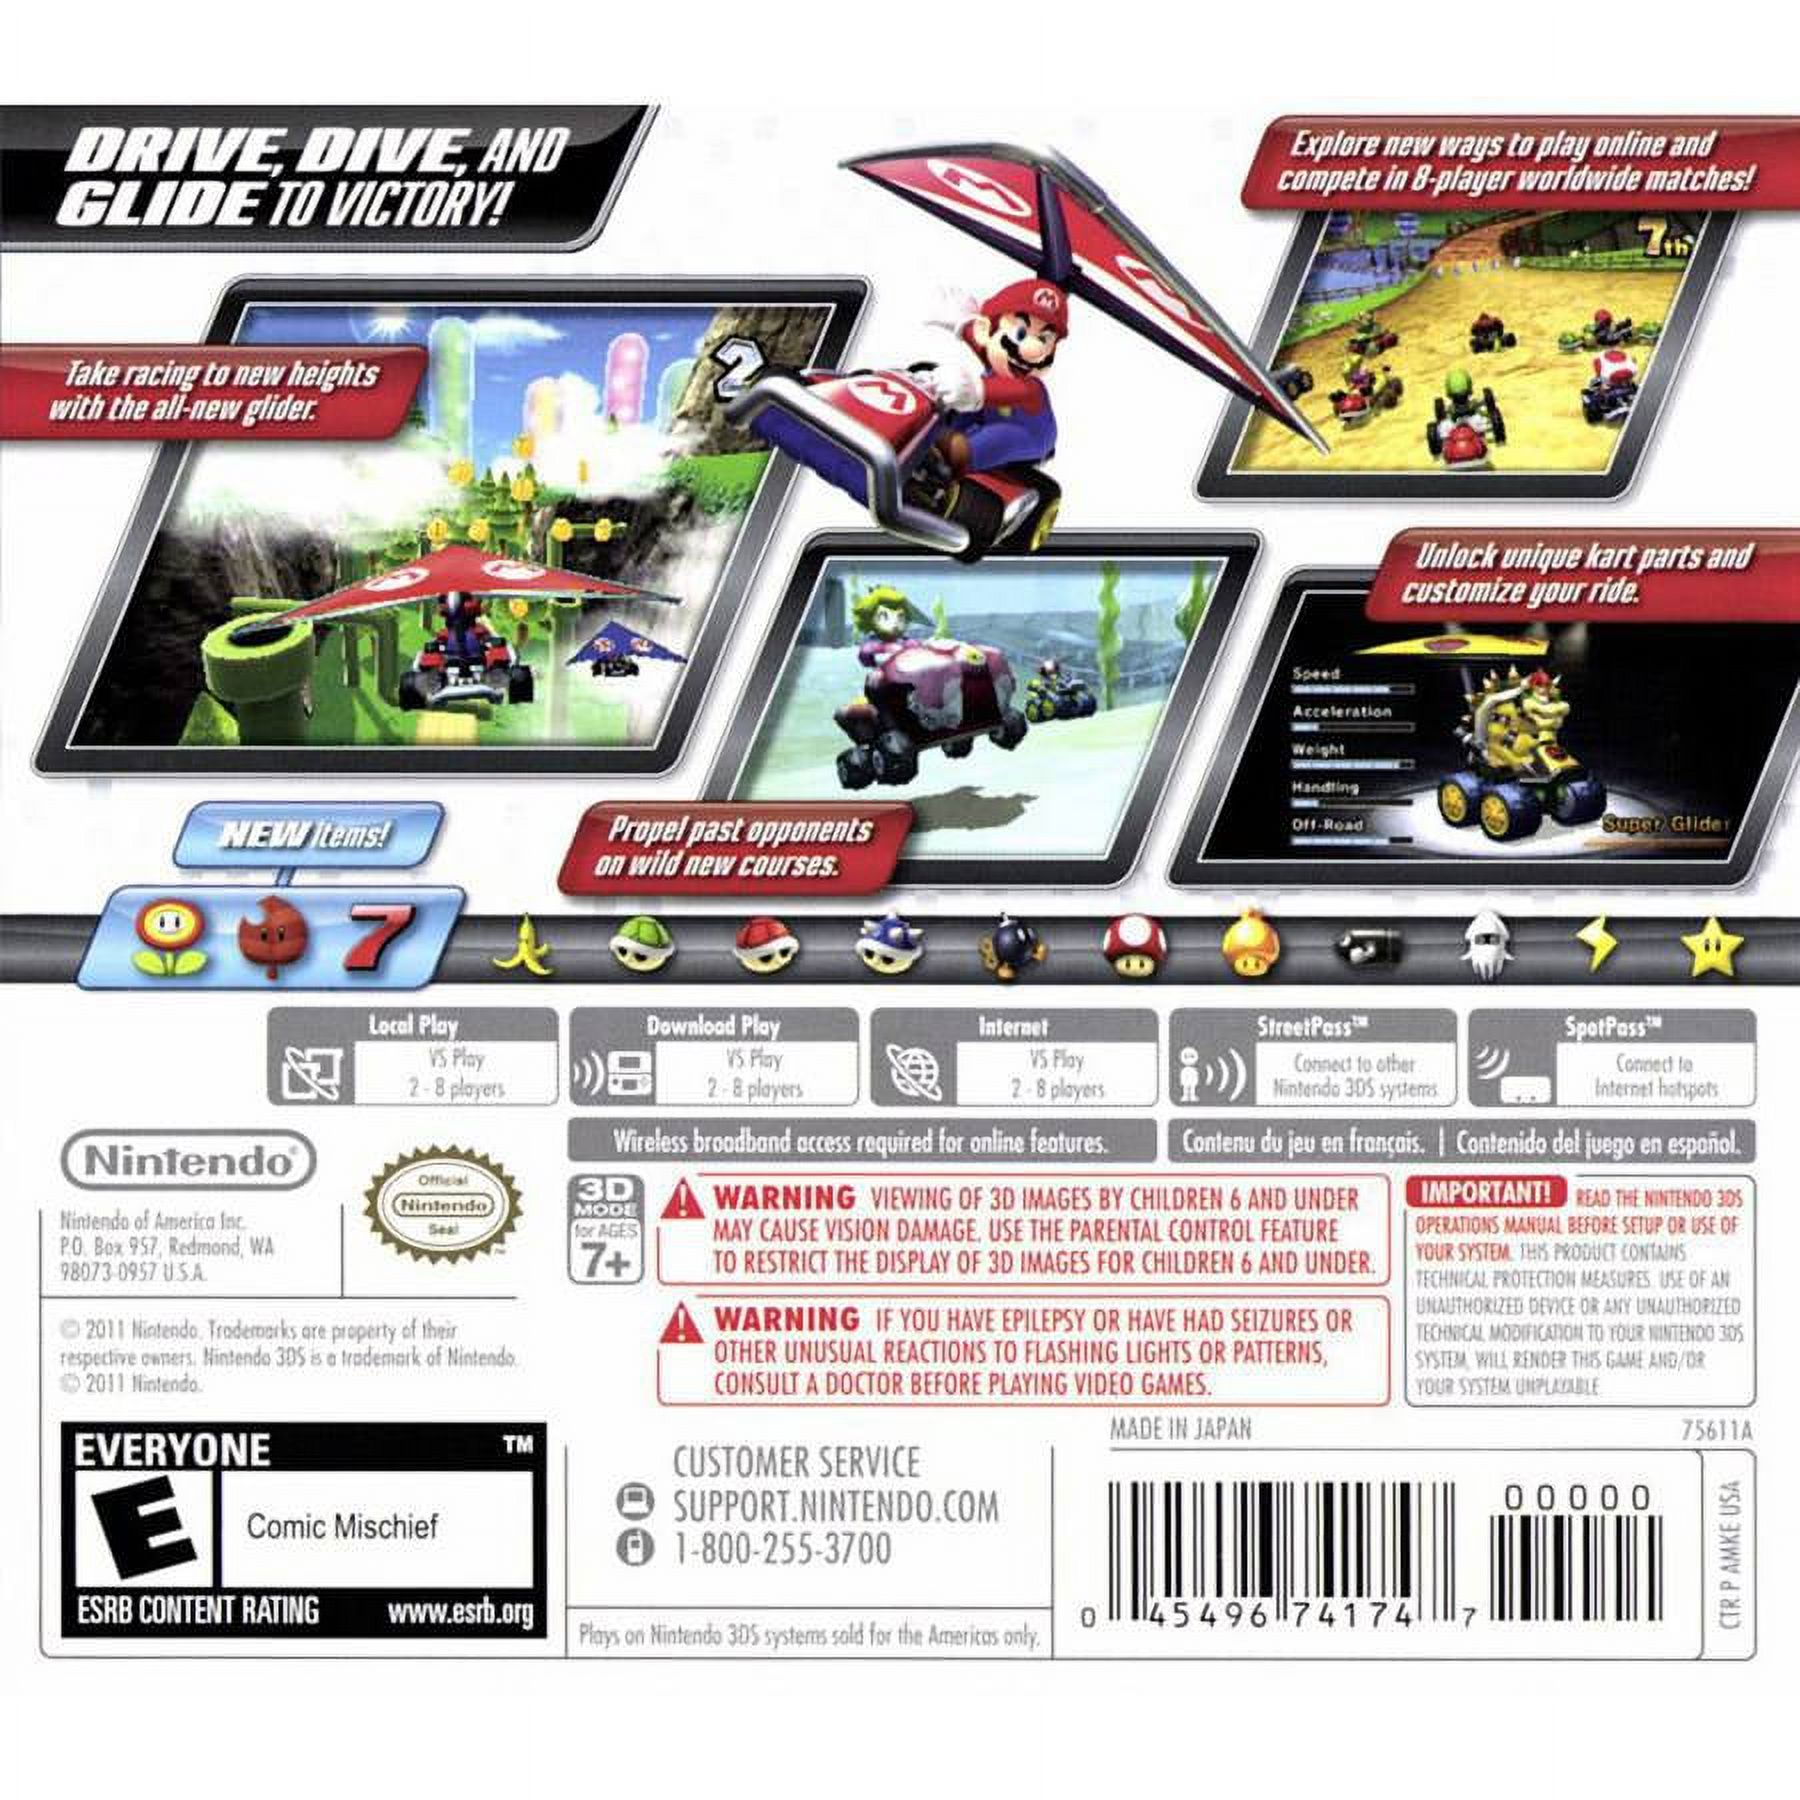 Mario Kart 7, Nintendo 3DS, [Physical Edition], 45496741747 - image 3 of 5